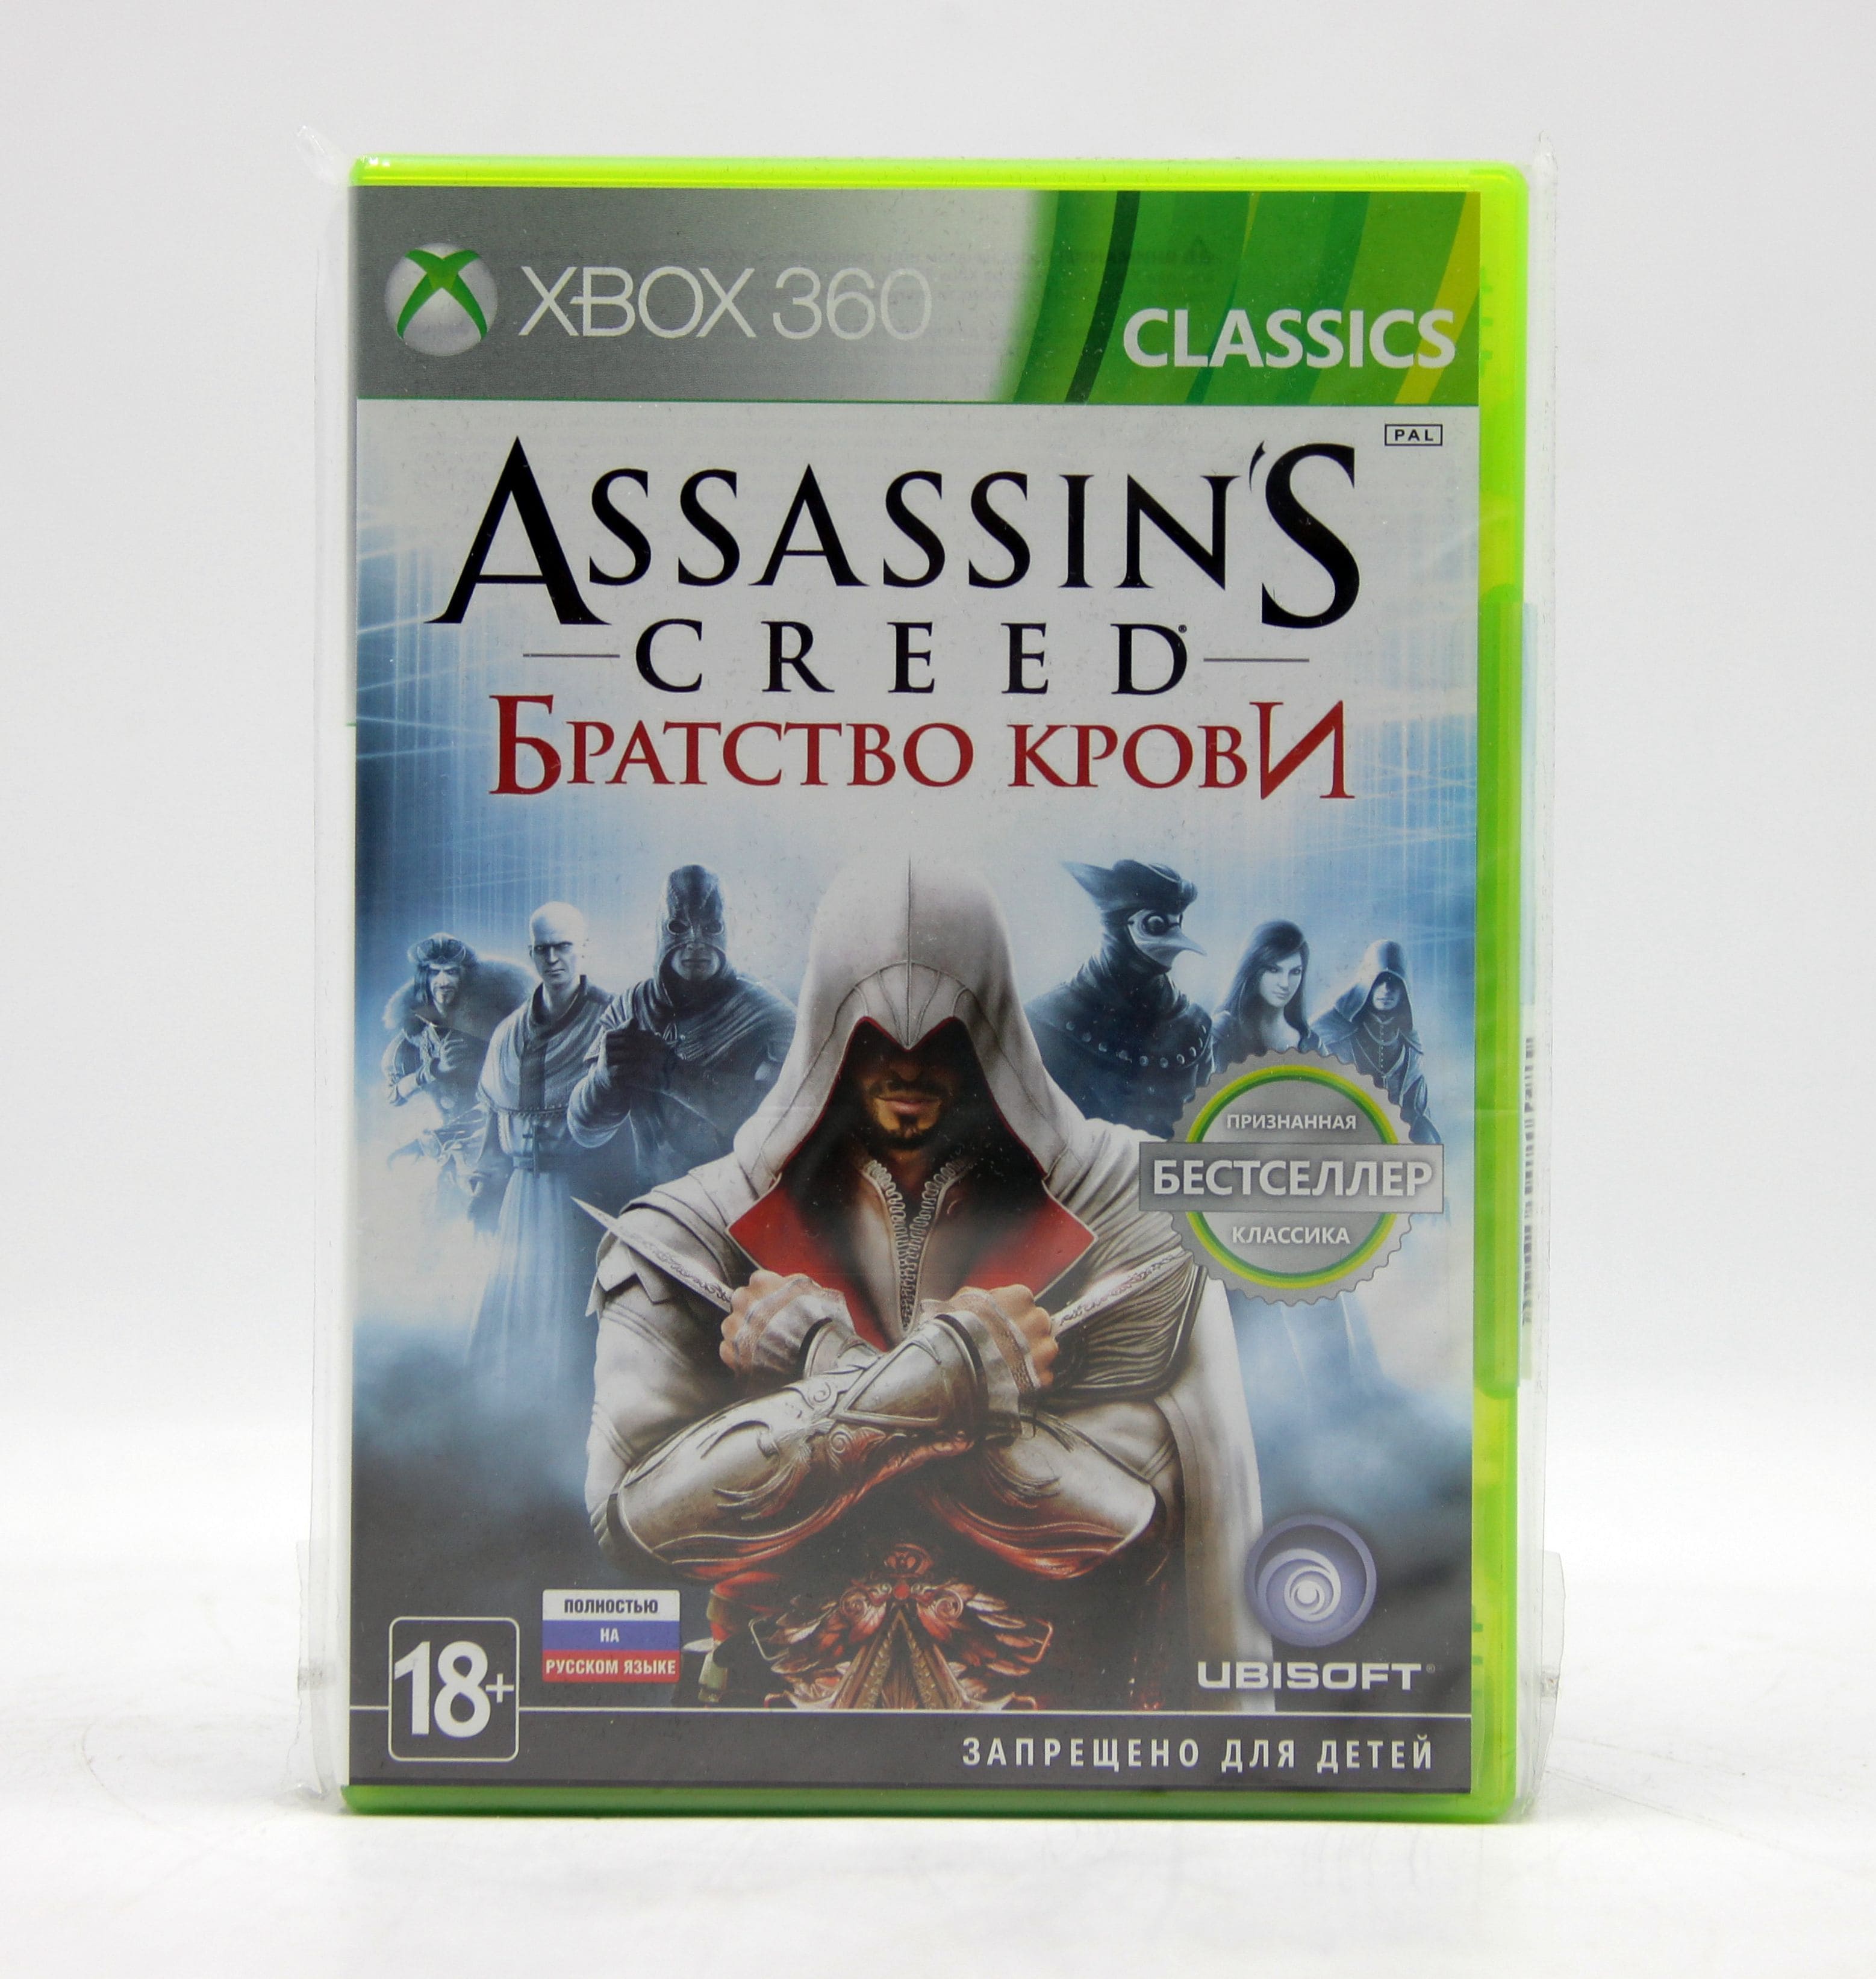 Assassin's Creed братство Xbox 360 Disk. Братство крови Xbox 360. Assassins Creed Brotherhood Xbox 360 Тула. Братство крови ассасин шифры.